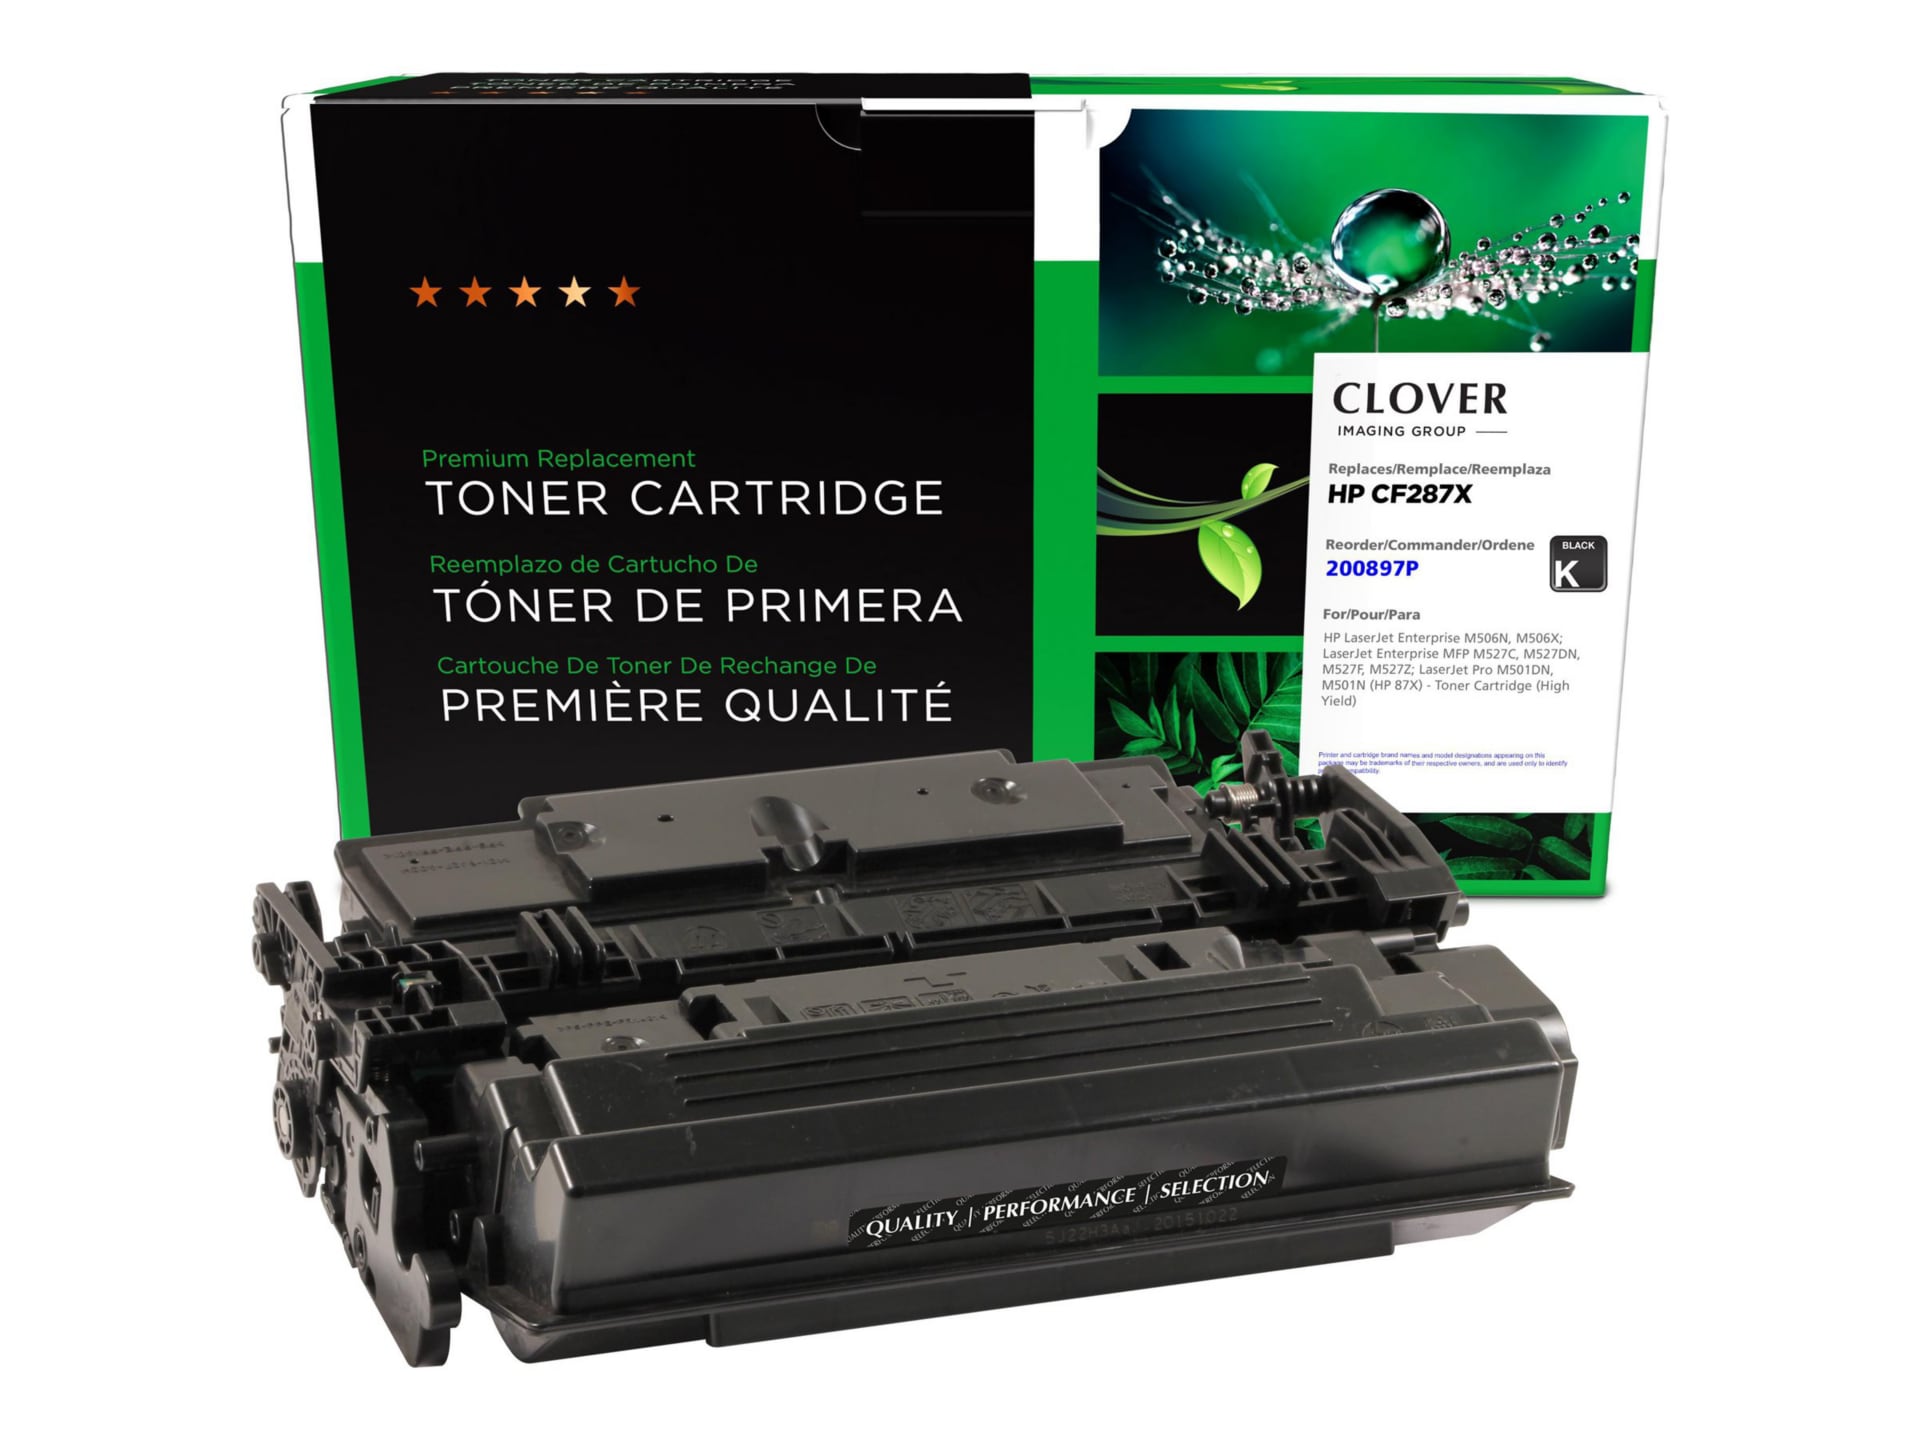 Clover Remanufactured Toner for HP CF287X (87X), Black, 18,000 page yield